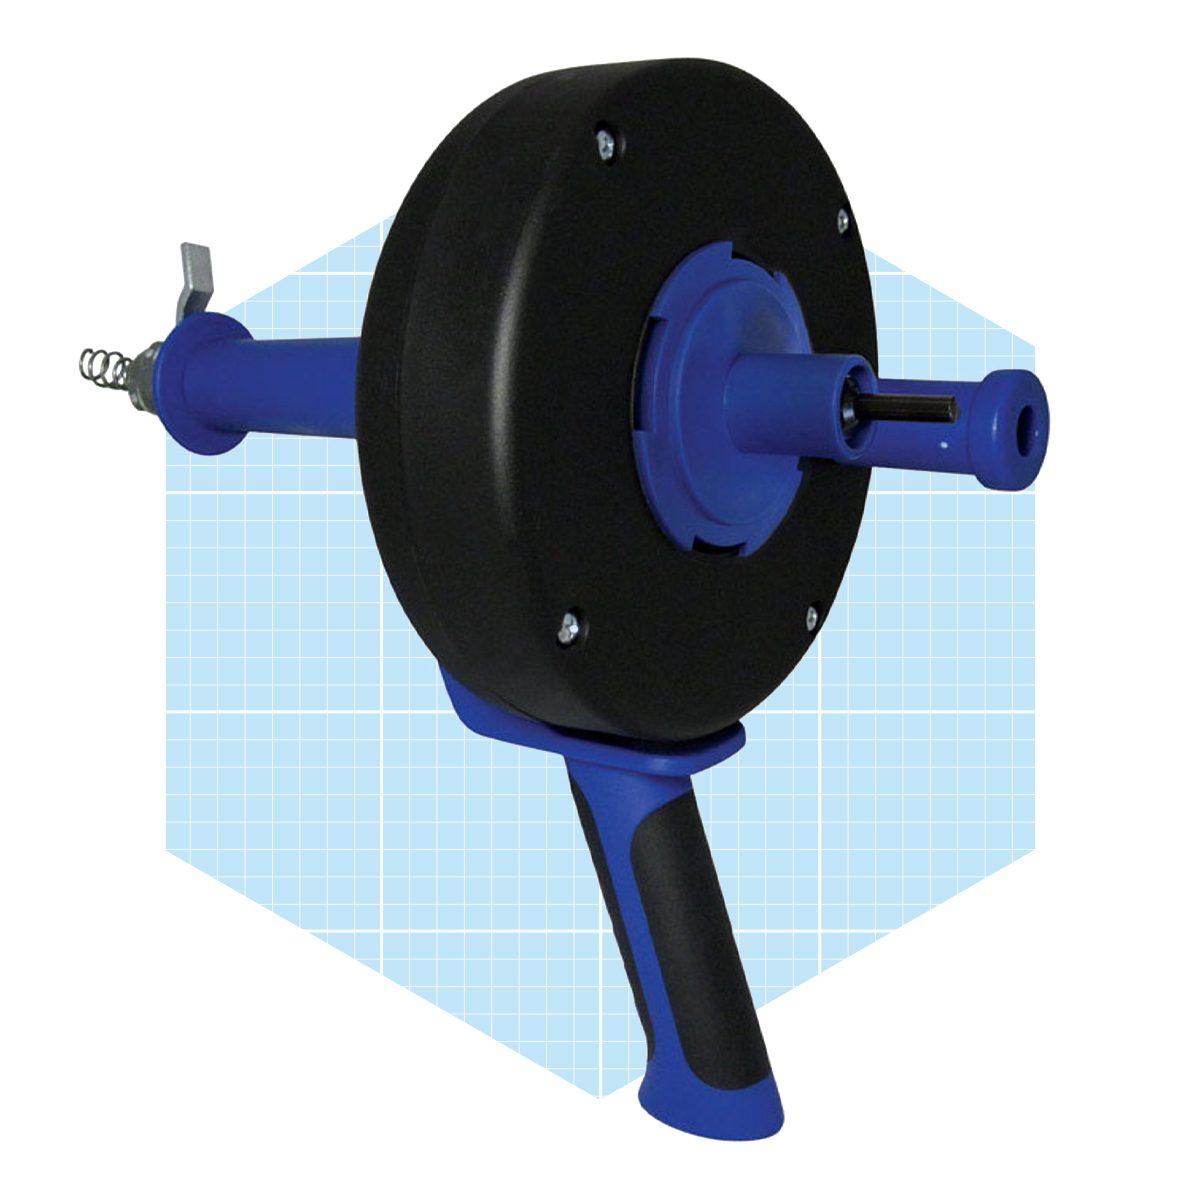 Unclog Drains with Ease Using This Power Drum Auger